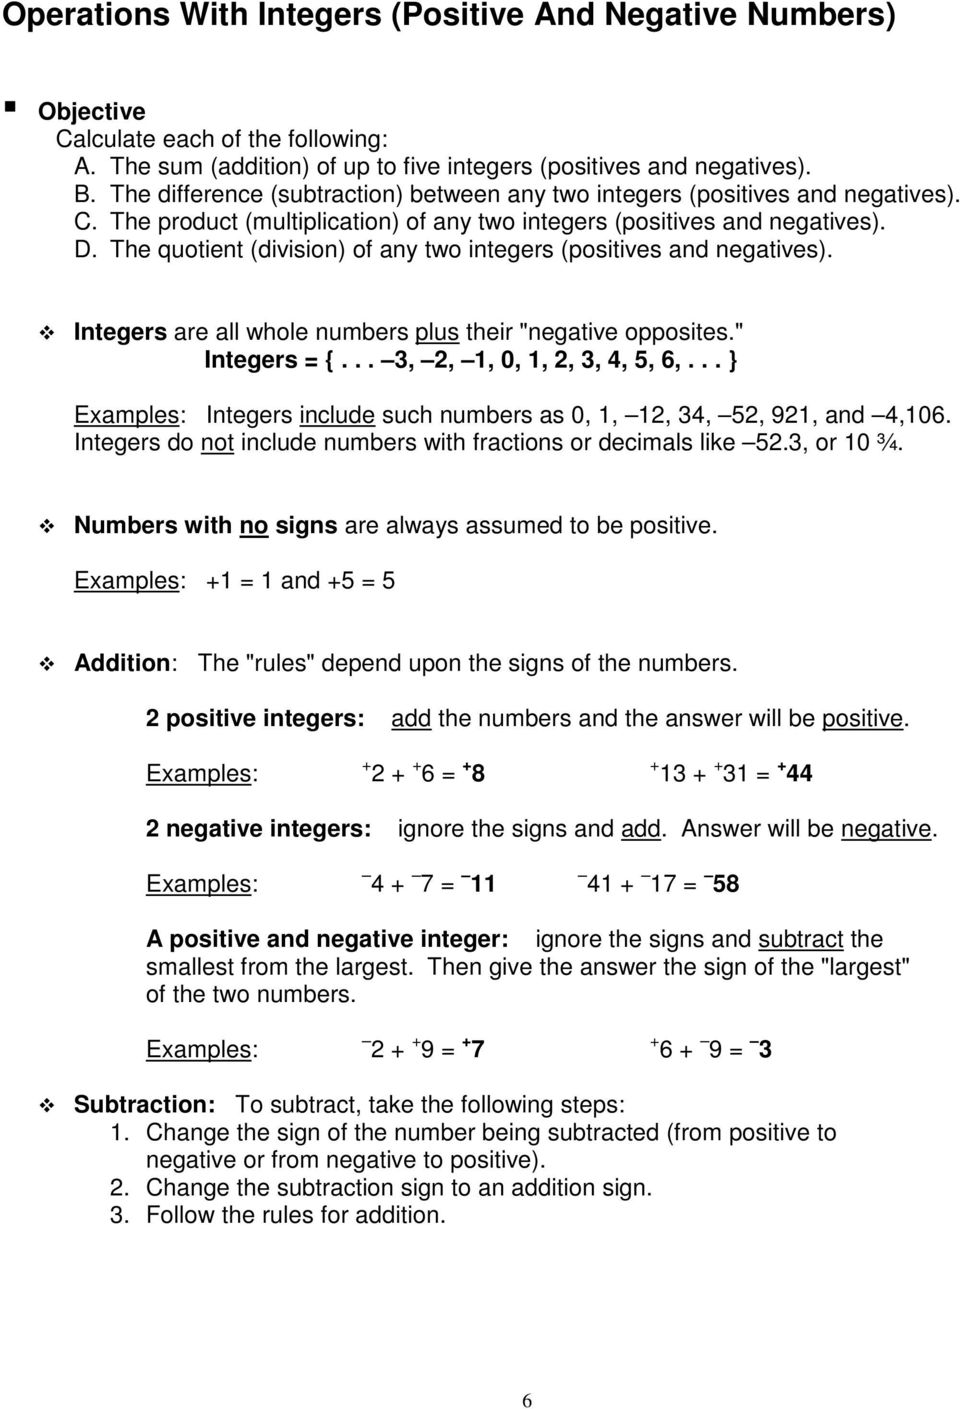 The quotient (division) of any two integers (positives and negatives). Integers are all whole numbers plus their "negative opposites." Integers = {... 3, 2, 1, 0, 1, 2, 3, 4, 5, 6,.